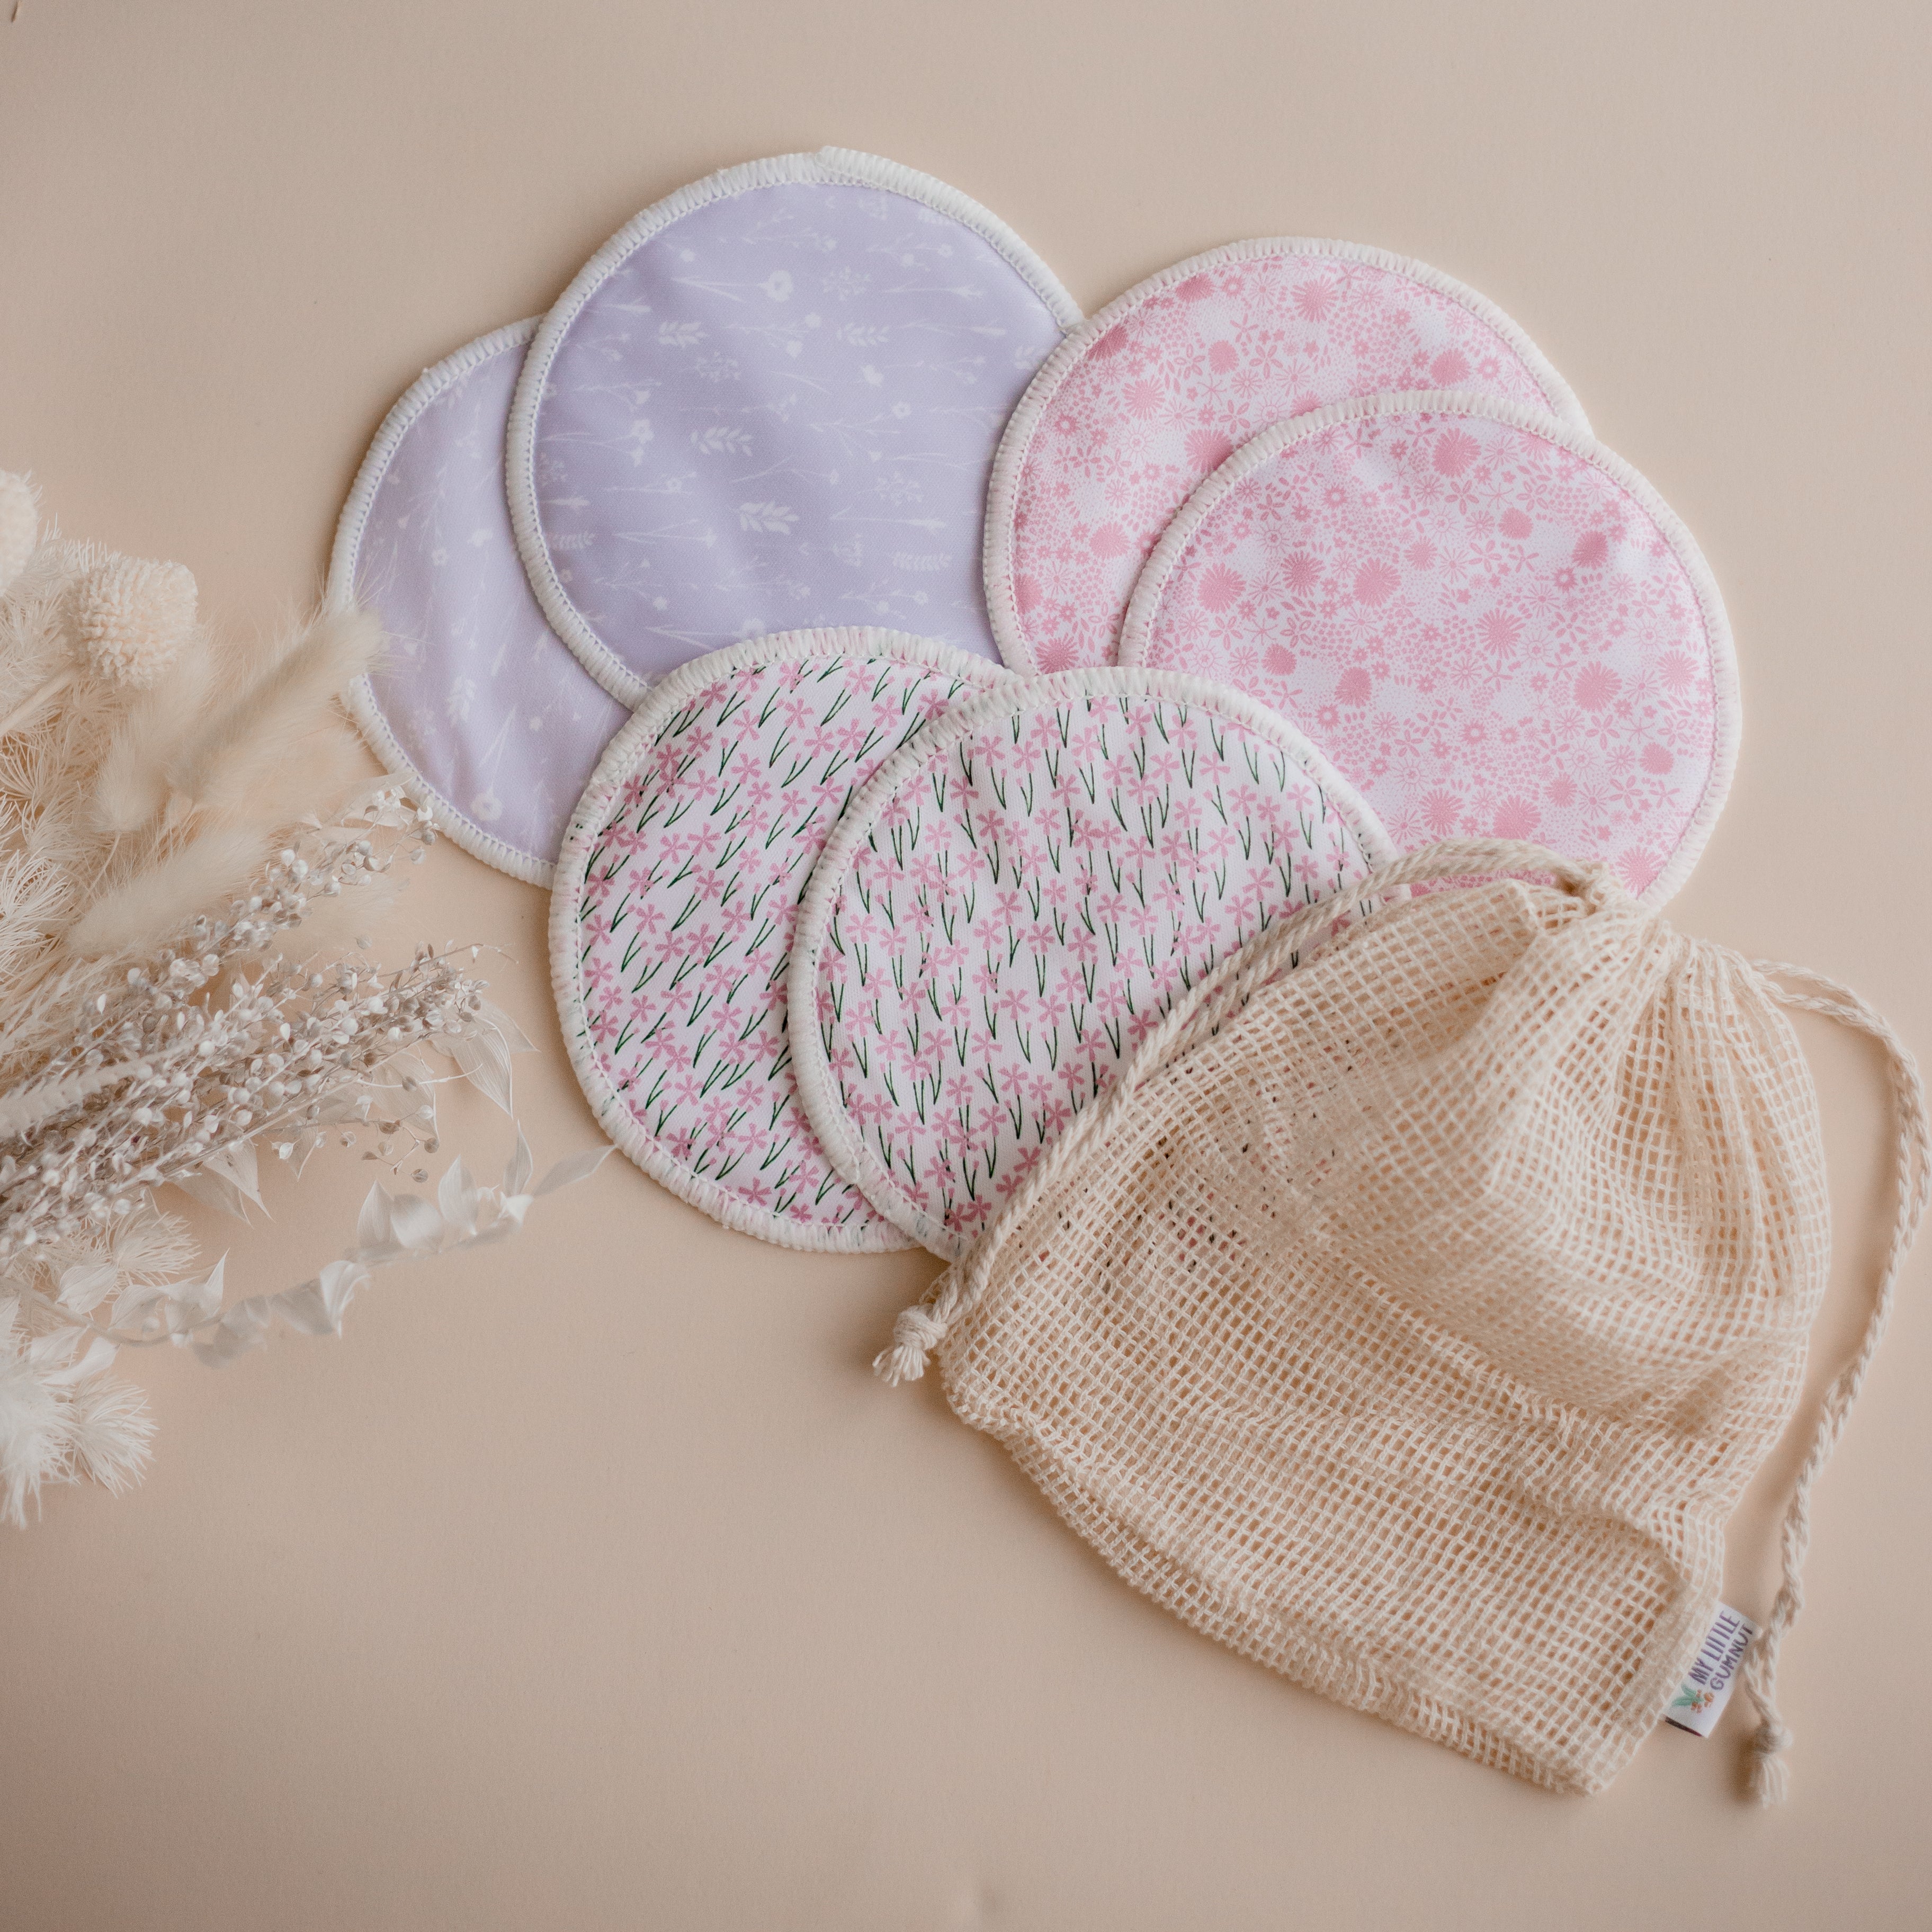 My Little Gumnut. Reusable Breast Pads 10 Pairs. Modern Cloth Nappies.